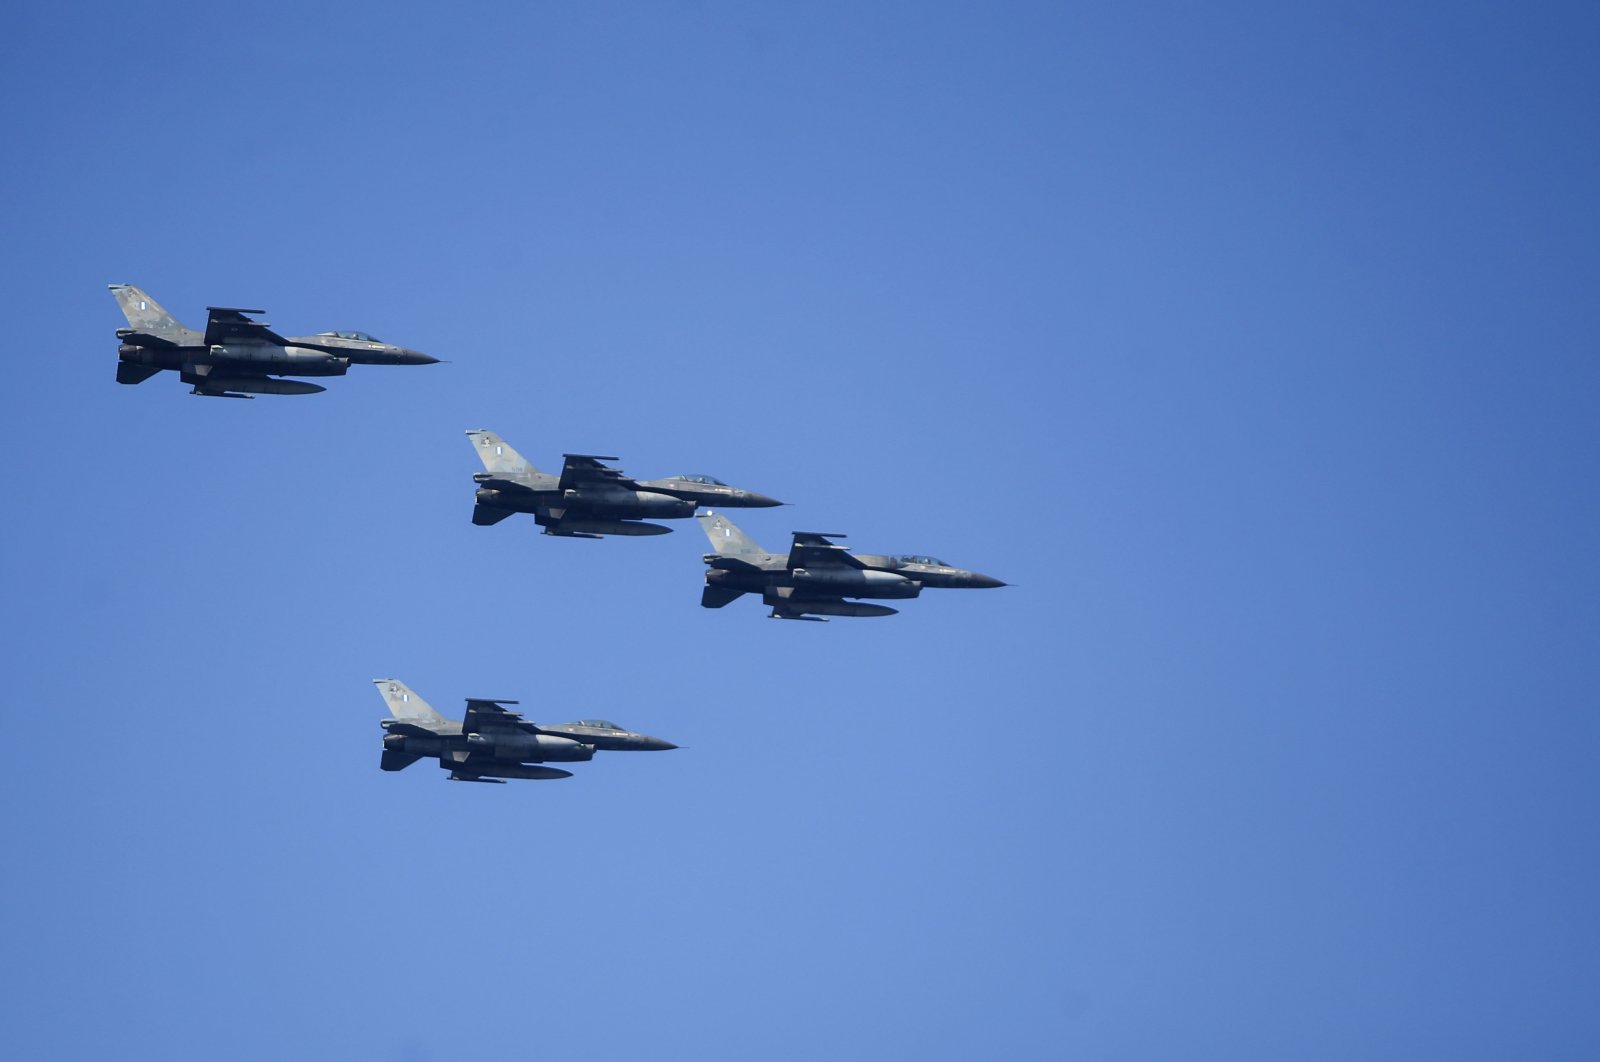 Greek F-16s take part in their annual military parade at the port city of Thessaloniki, northern Greece, Oct. 28, 2021. (AP File Photo)